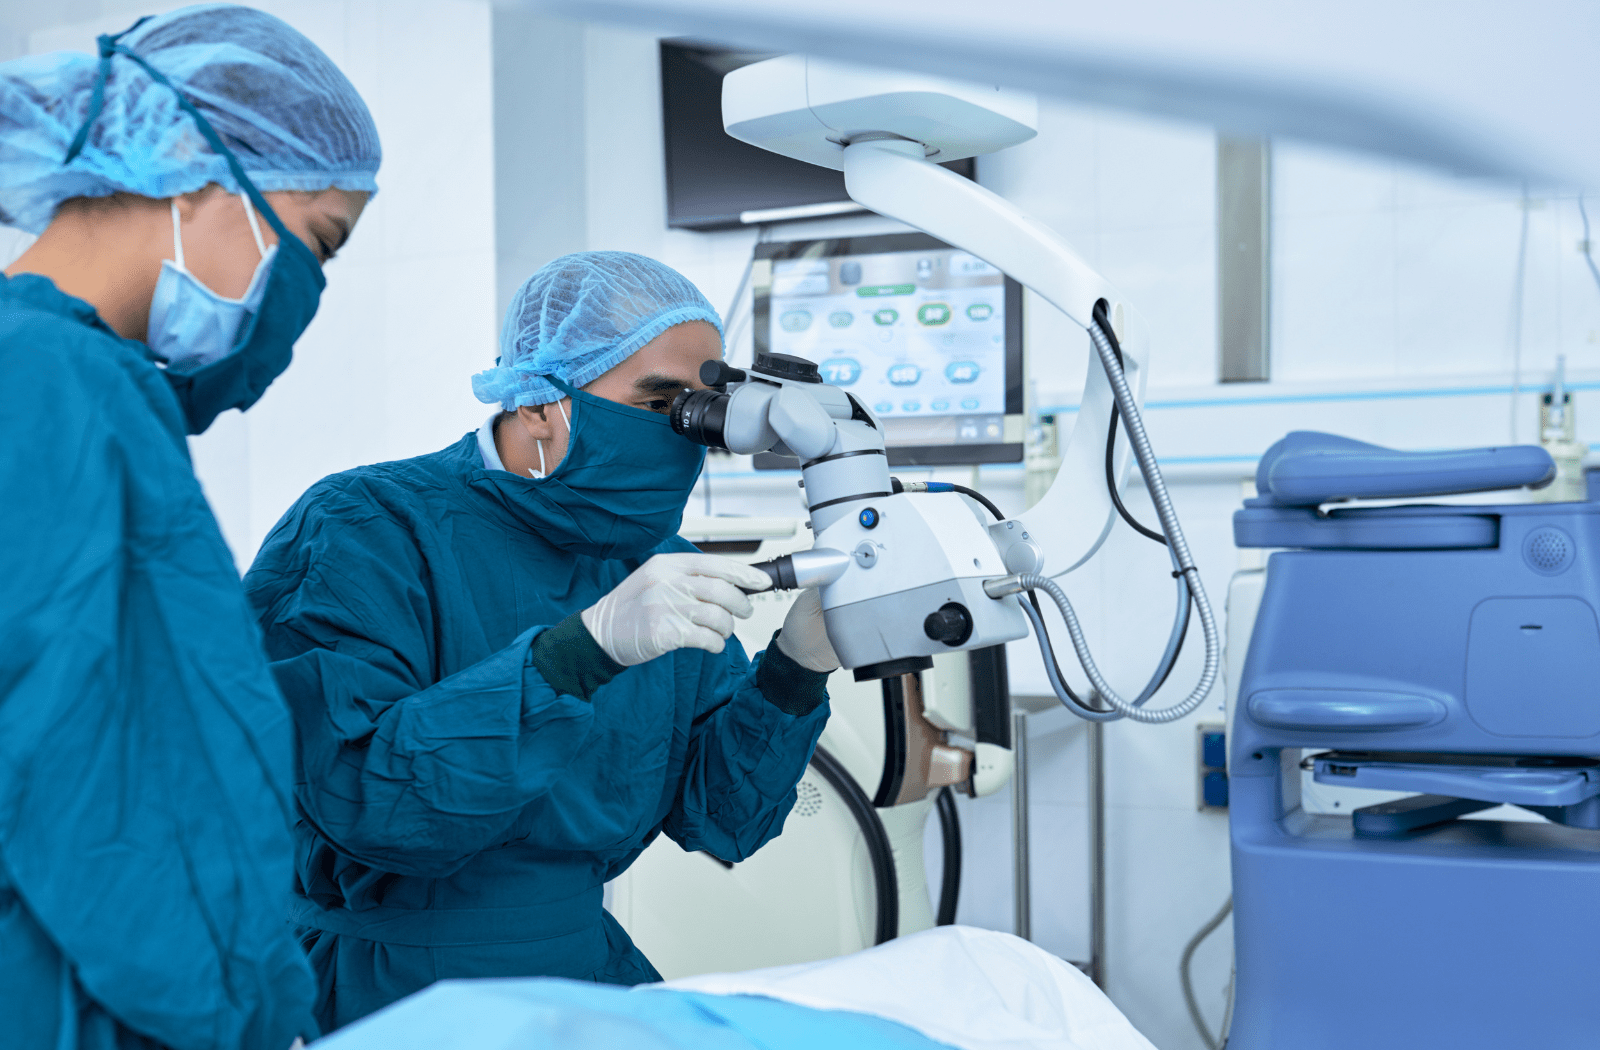 An ophthalmologic surgeon preparing for cataract surgery on a patient